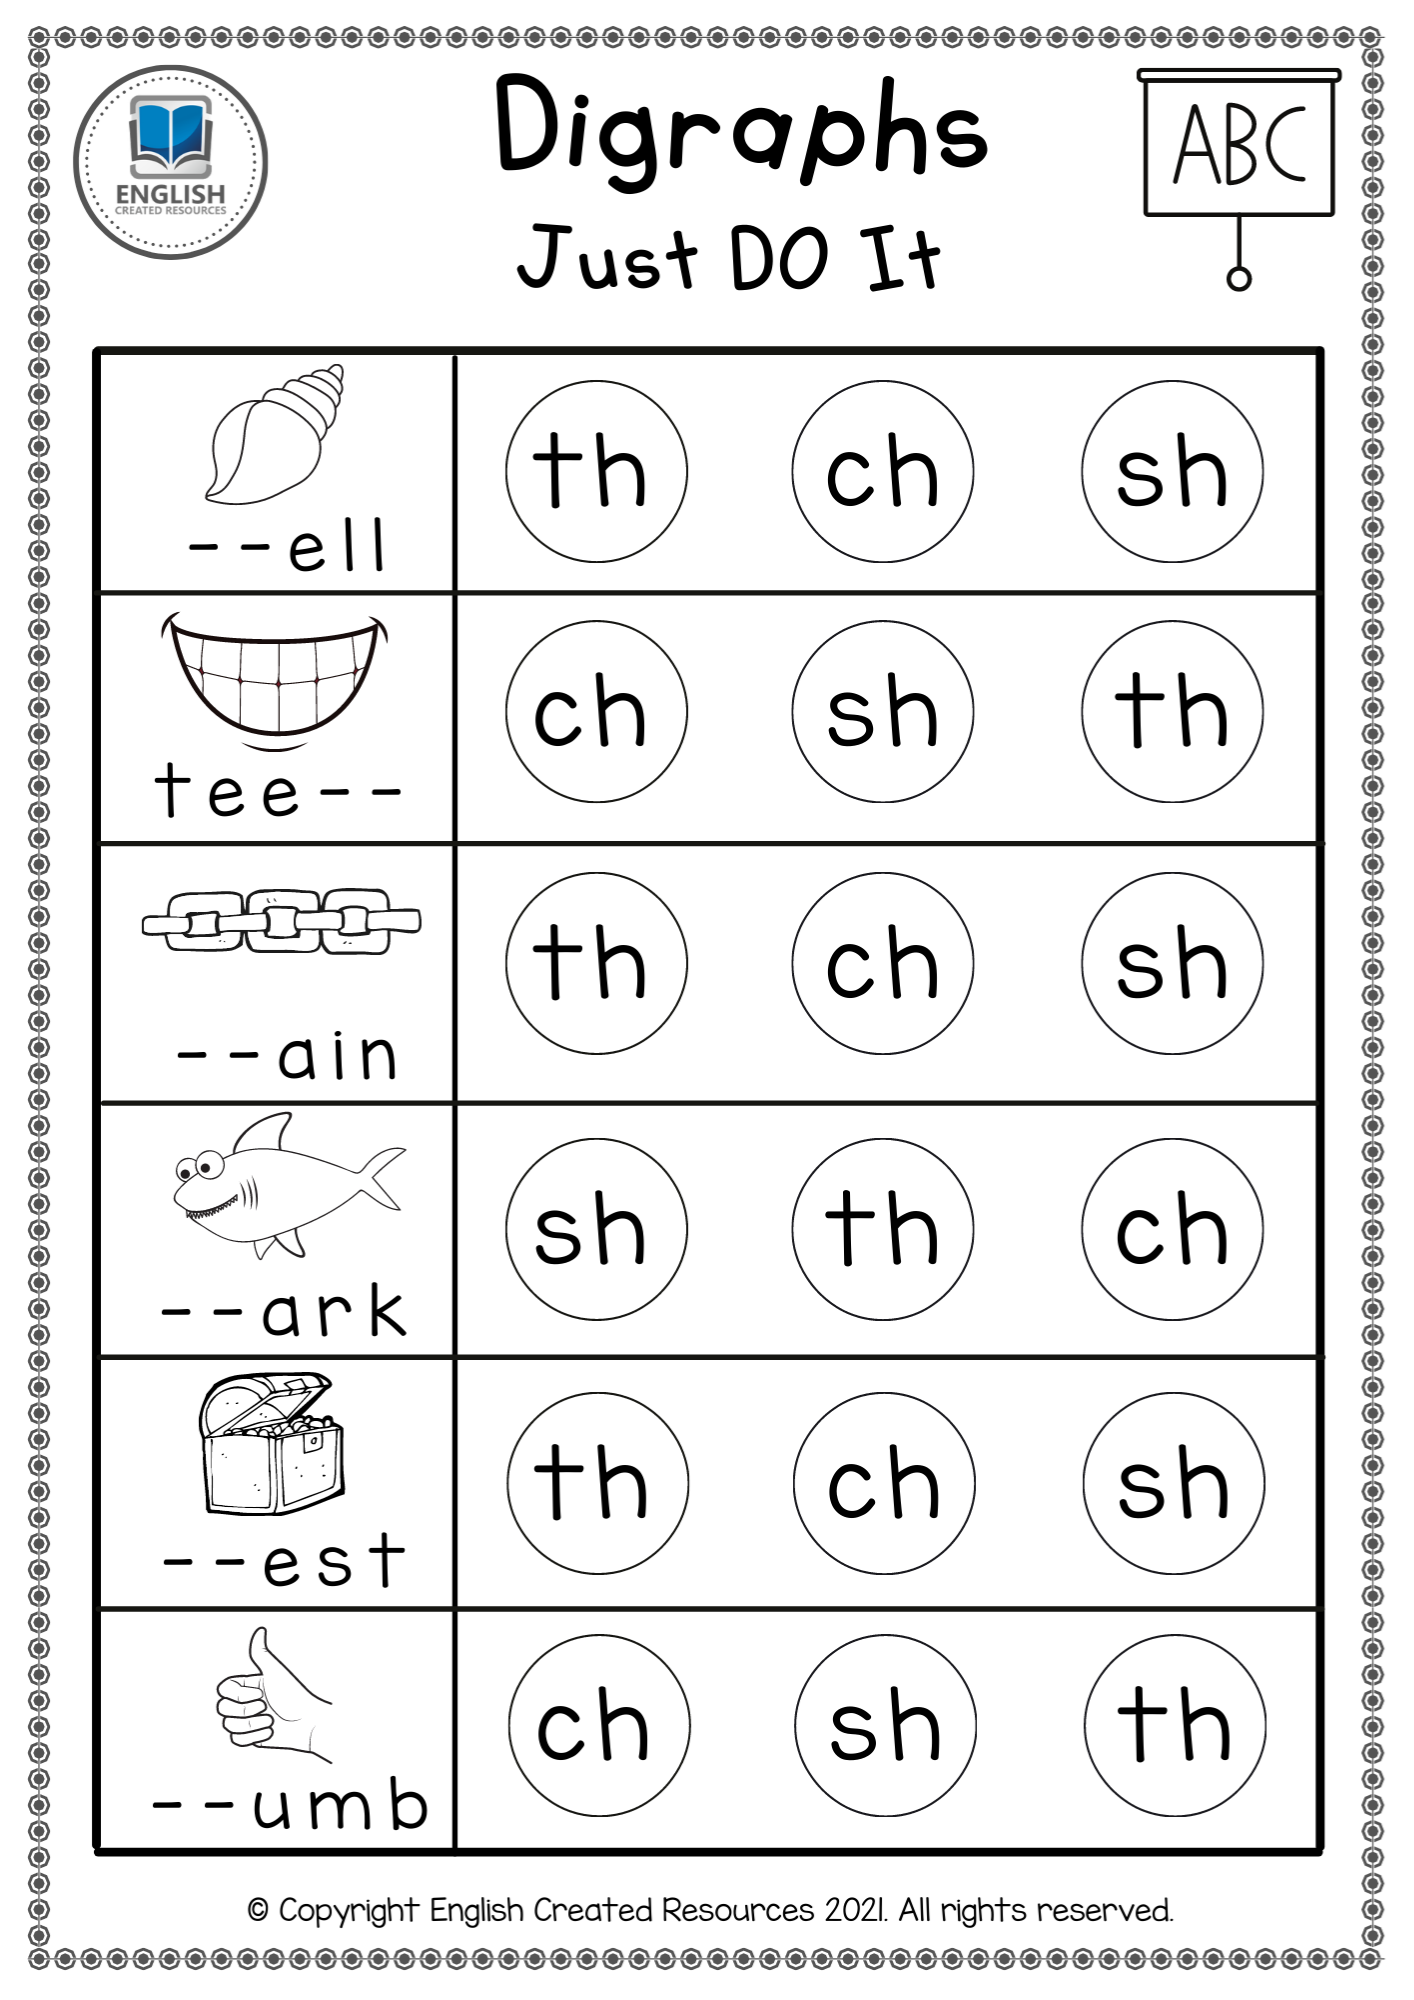 digraphs-activity-book-english-created-resources